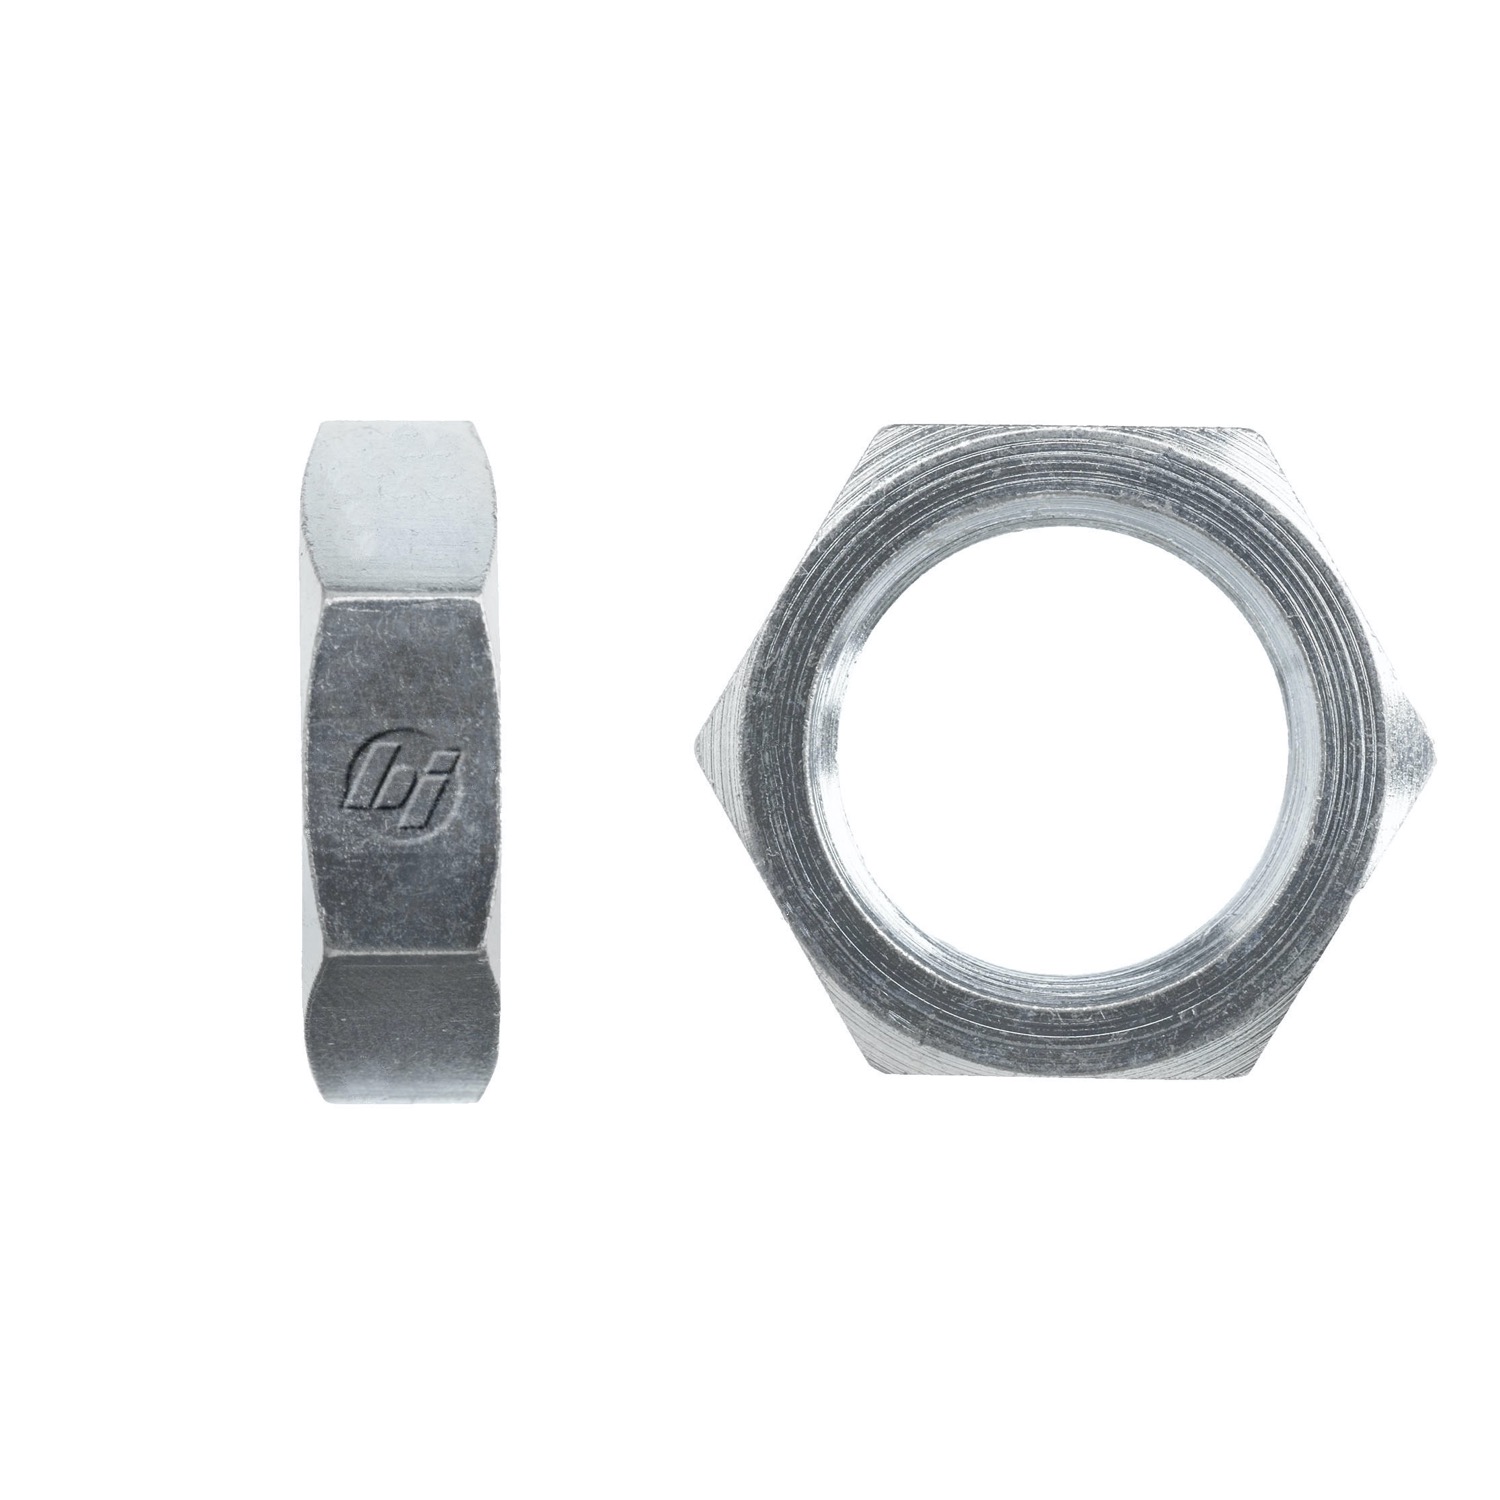 Hydraulic Hose Adapters - Nut Fitting, 0306 Series 0306-05